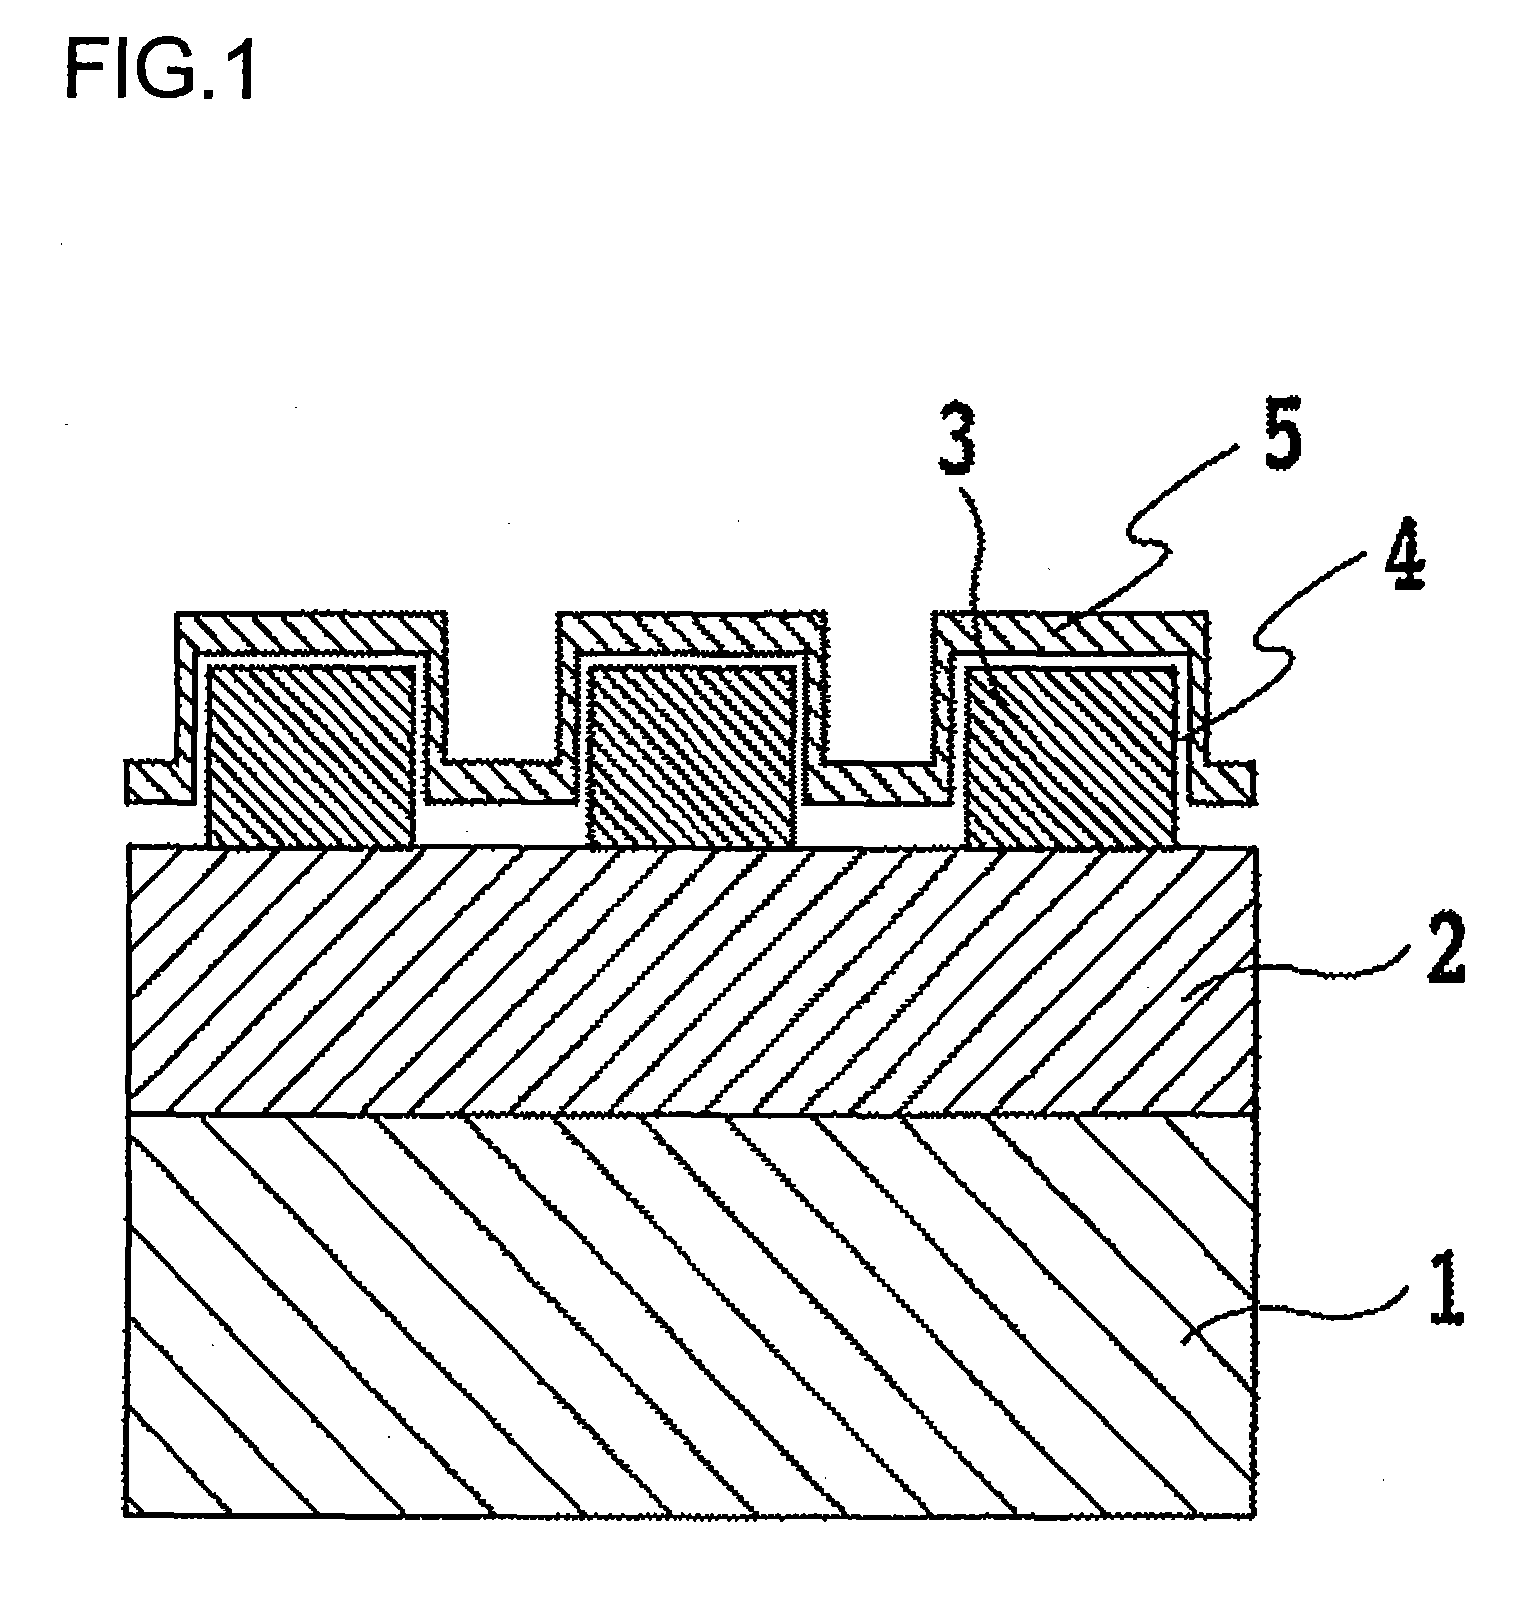 Magnetic recording medium and a method of manufacturing the same